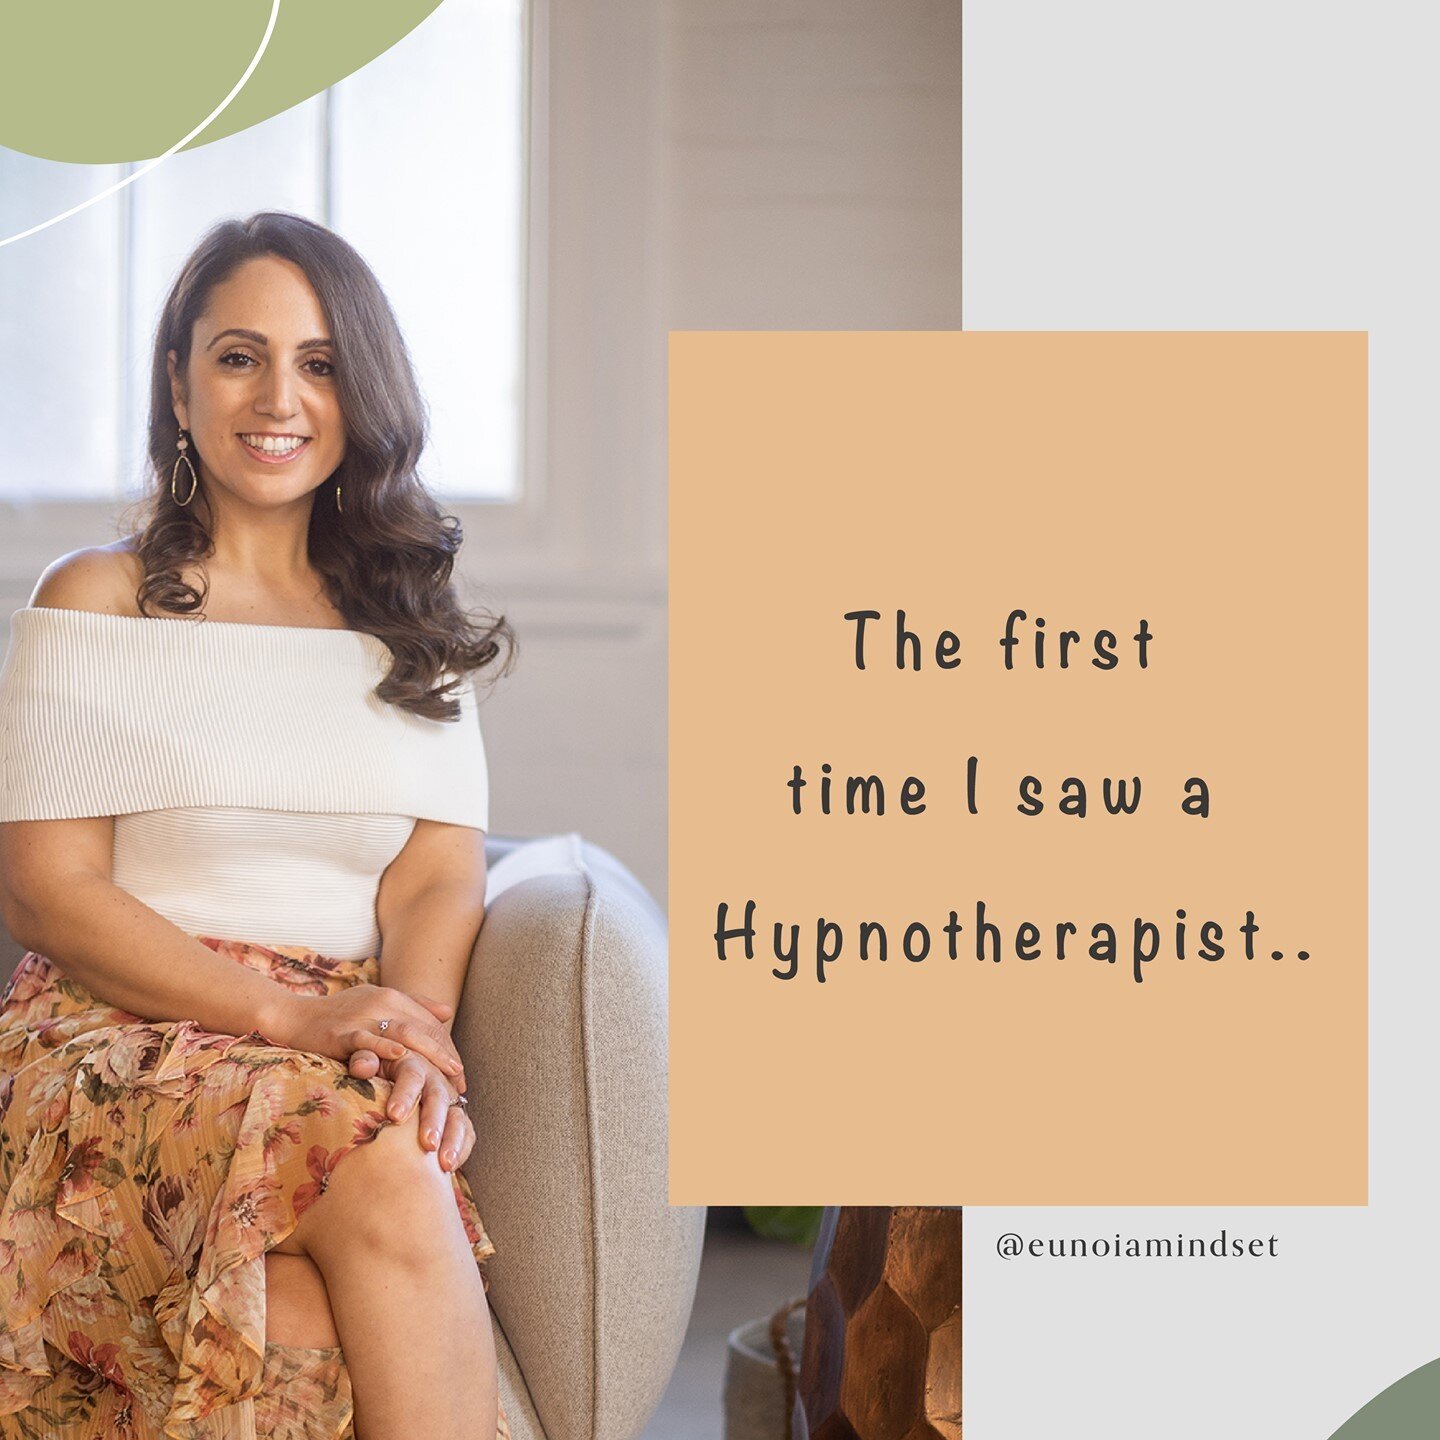 I remember my first time seeing a hypnotherapist&hellip;
 
I was nervous, intrigued and had absolutely no idea what to expect! I also felt this sense of subtle embarrassment and I wasn&rsquo;t even sure I believed it would work.

I was 100% convinced